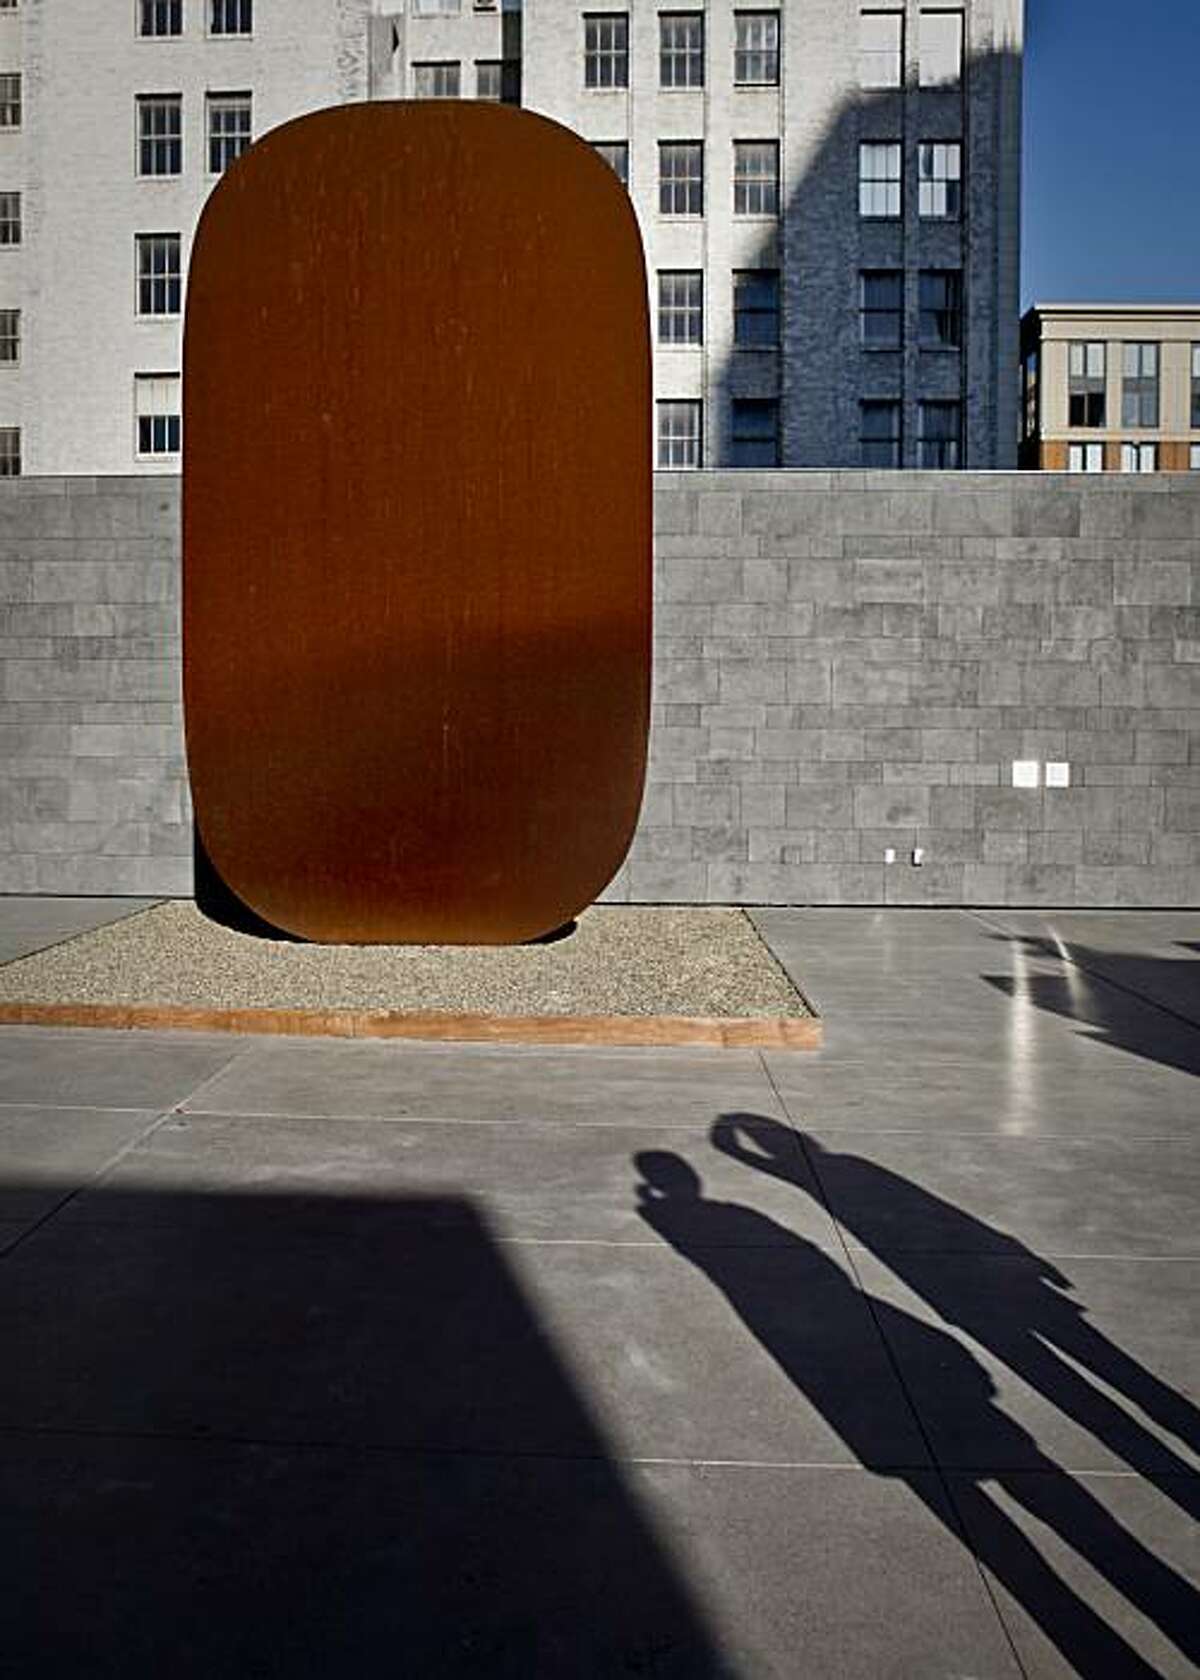 Andrea Silvestri of Oakland, left, and Edi Berton of San Francisco look at Ellsworth Kelly's Stele I in The Rooftop Garden at the San Francisco Museum of Modern Art on Thursday, Dec. 3, 2009.